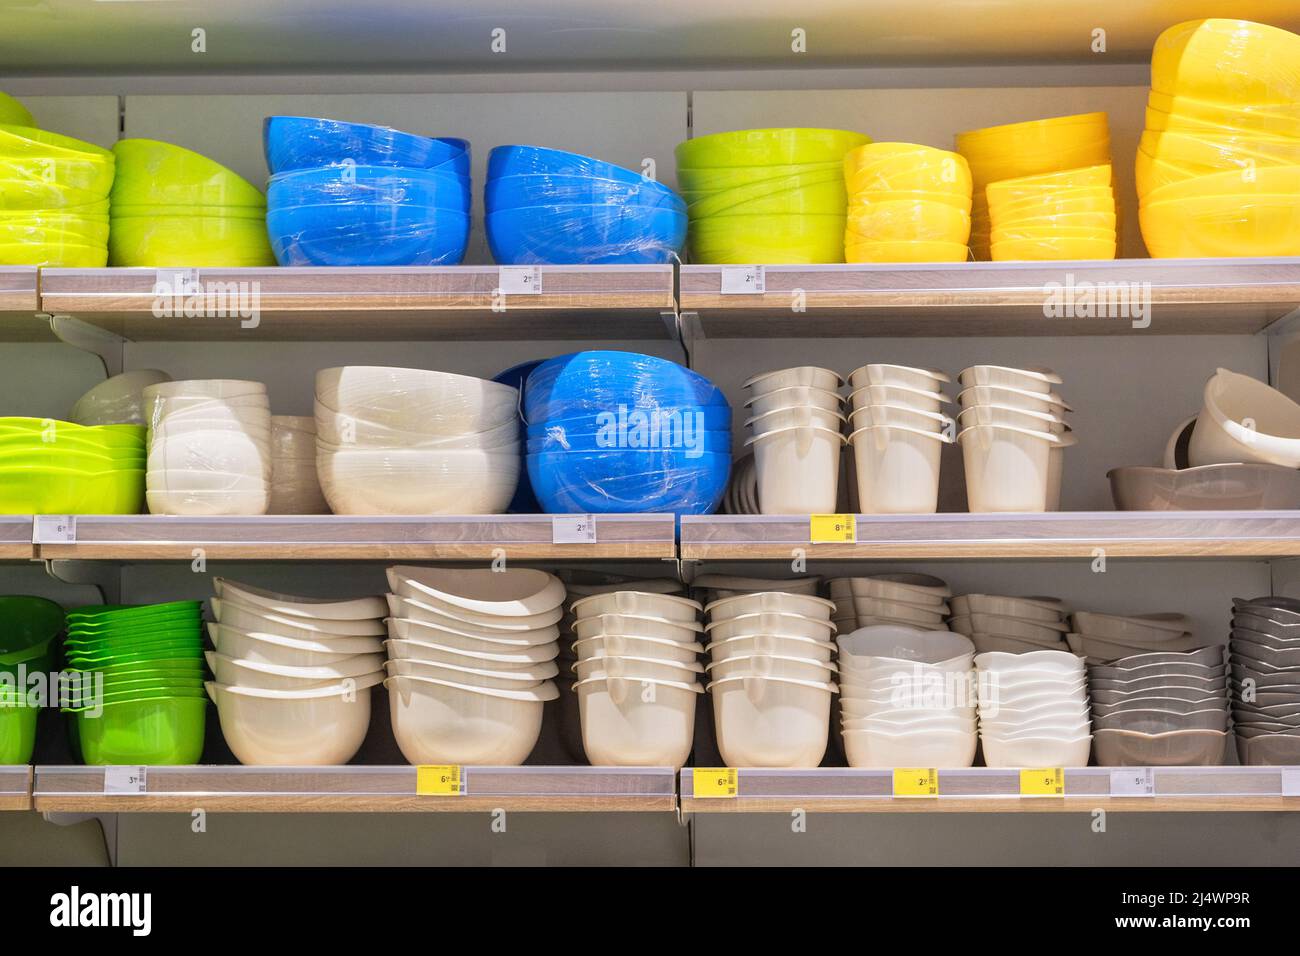 https://c8.alamy.com/comp/2J4WP9R/shelves-in-the-store-with-plastic-storage-bowls-inexpensive-alternative-to-subjects-made-from-natural-materials-set-of-plastic-baskets-and-boxes-in-2J4WP9R.jpg